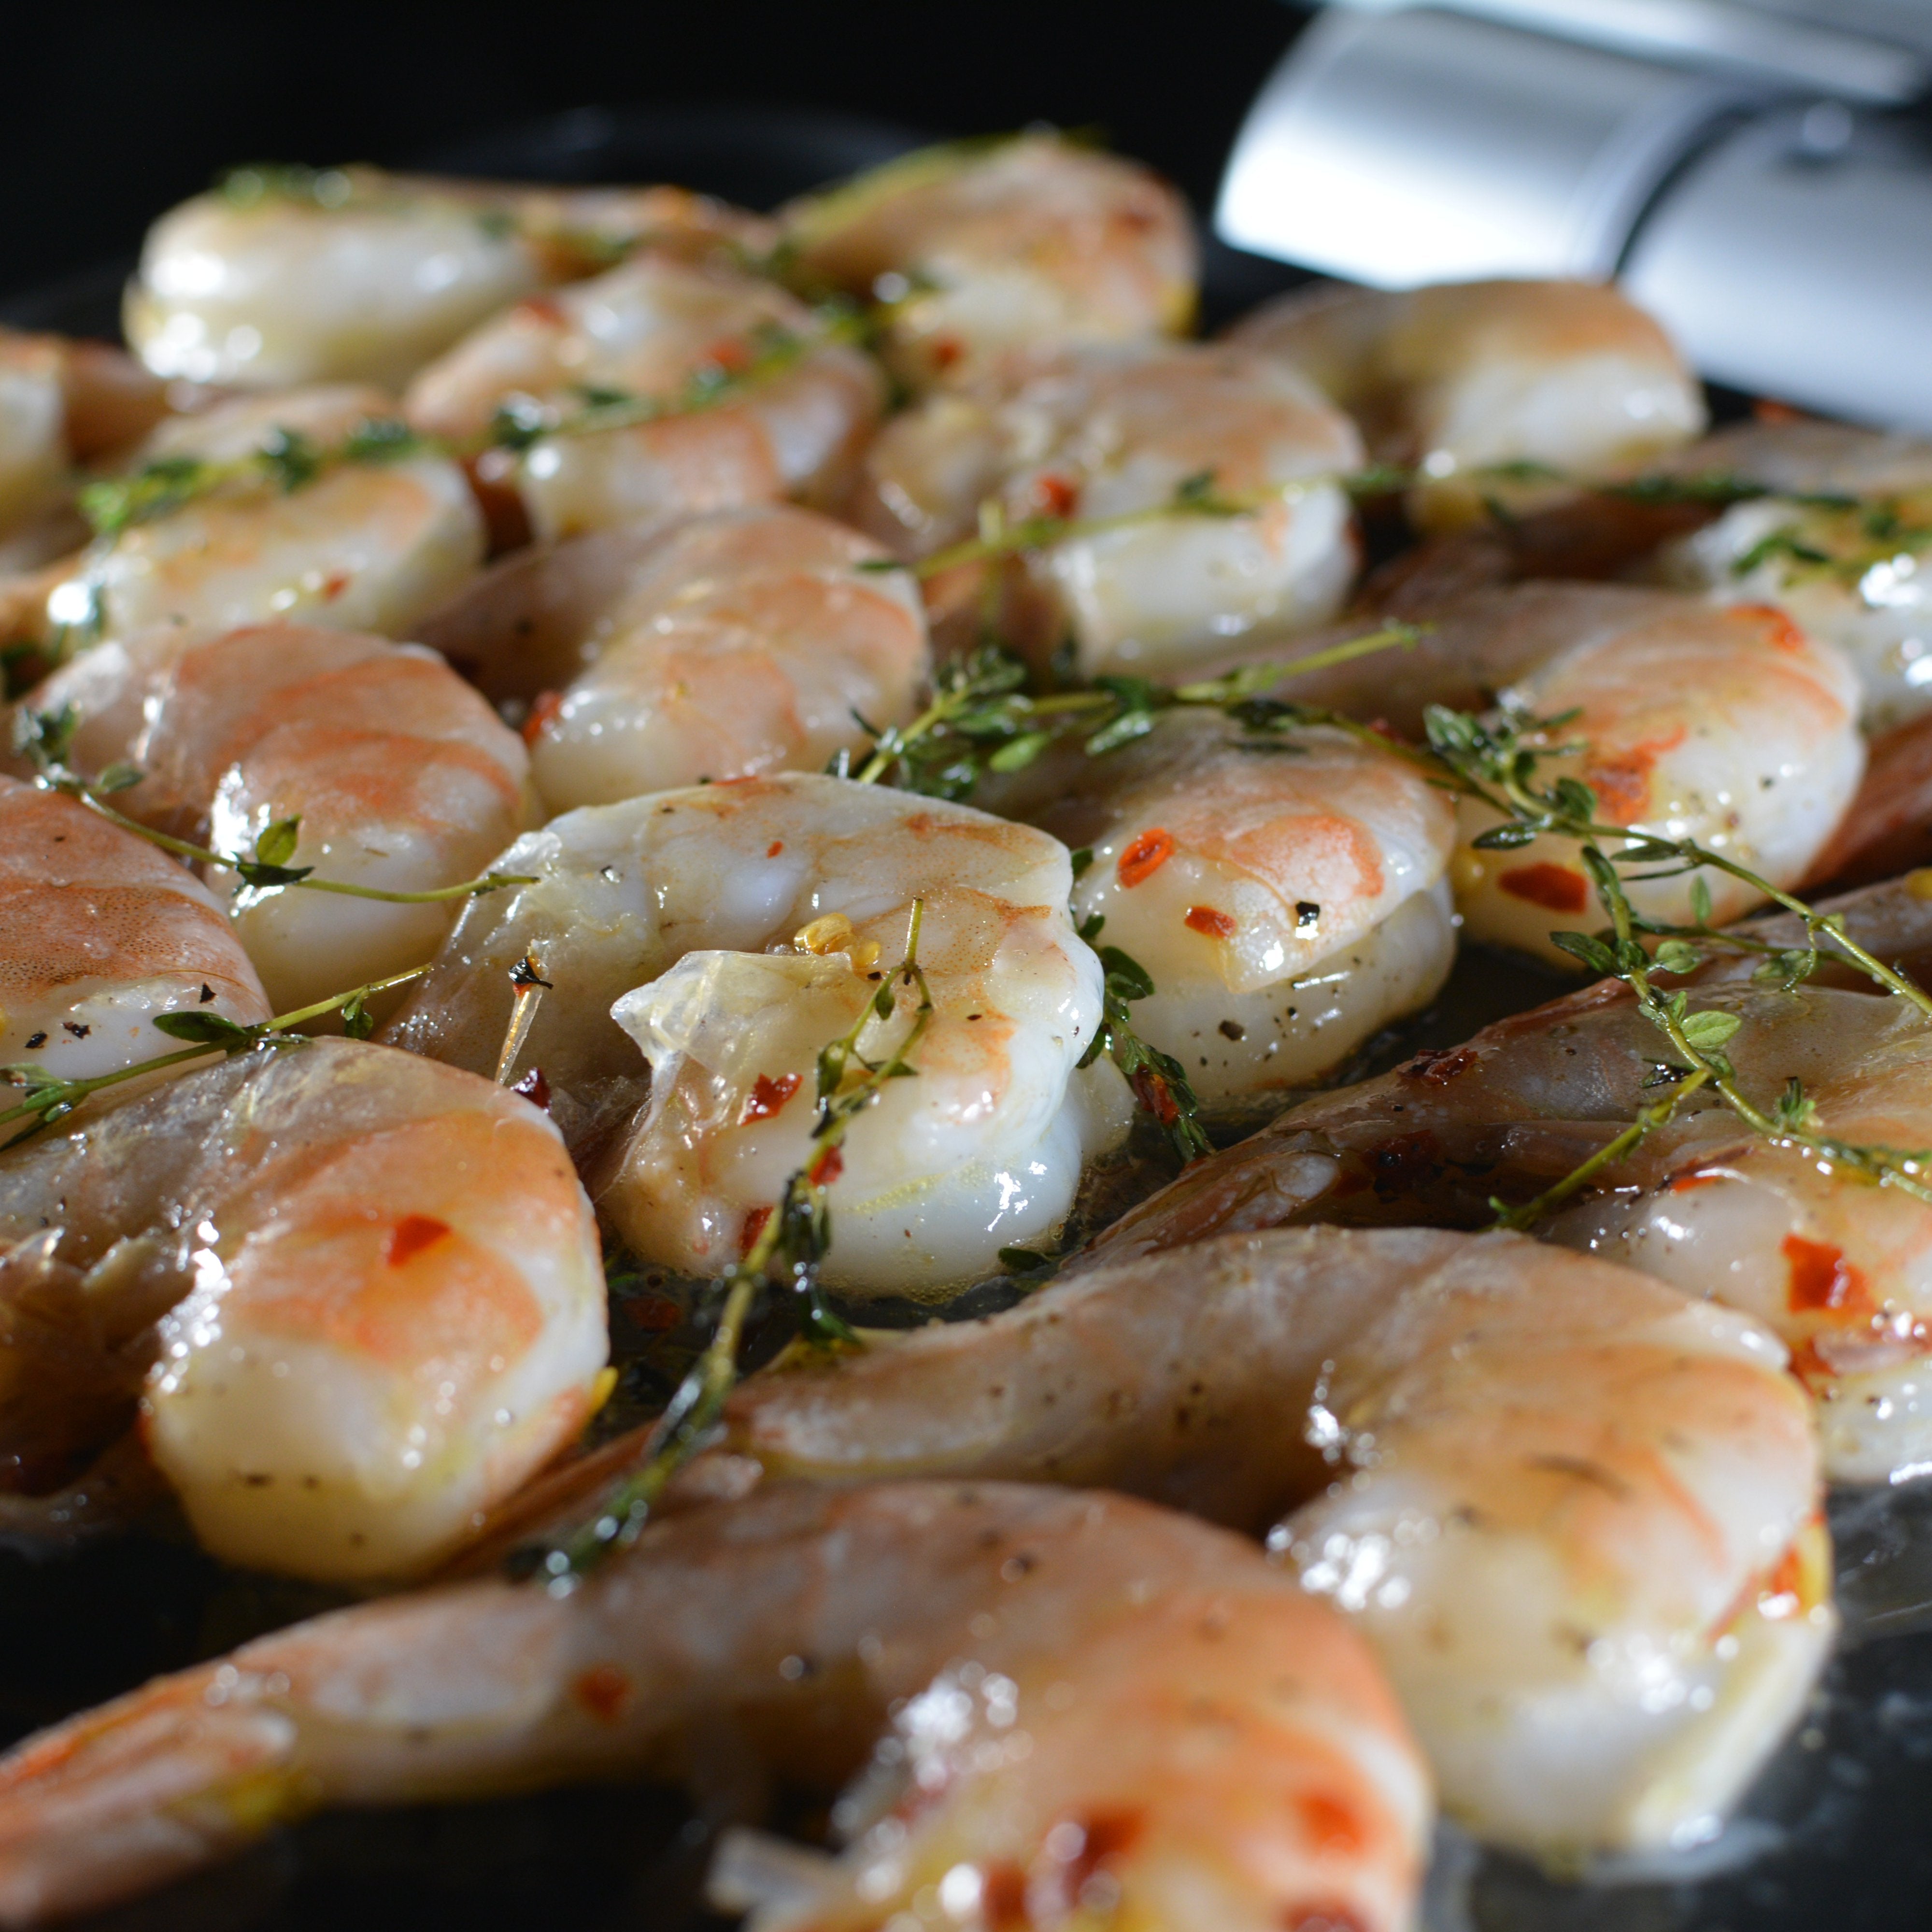 Grilled Ceviche Shrimp recipe on Cinder grill